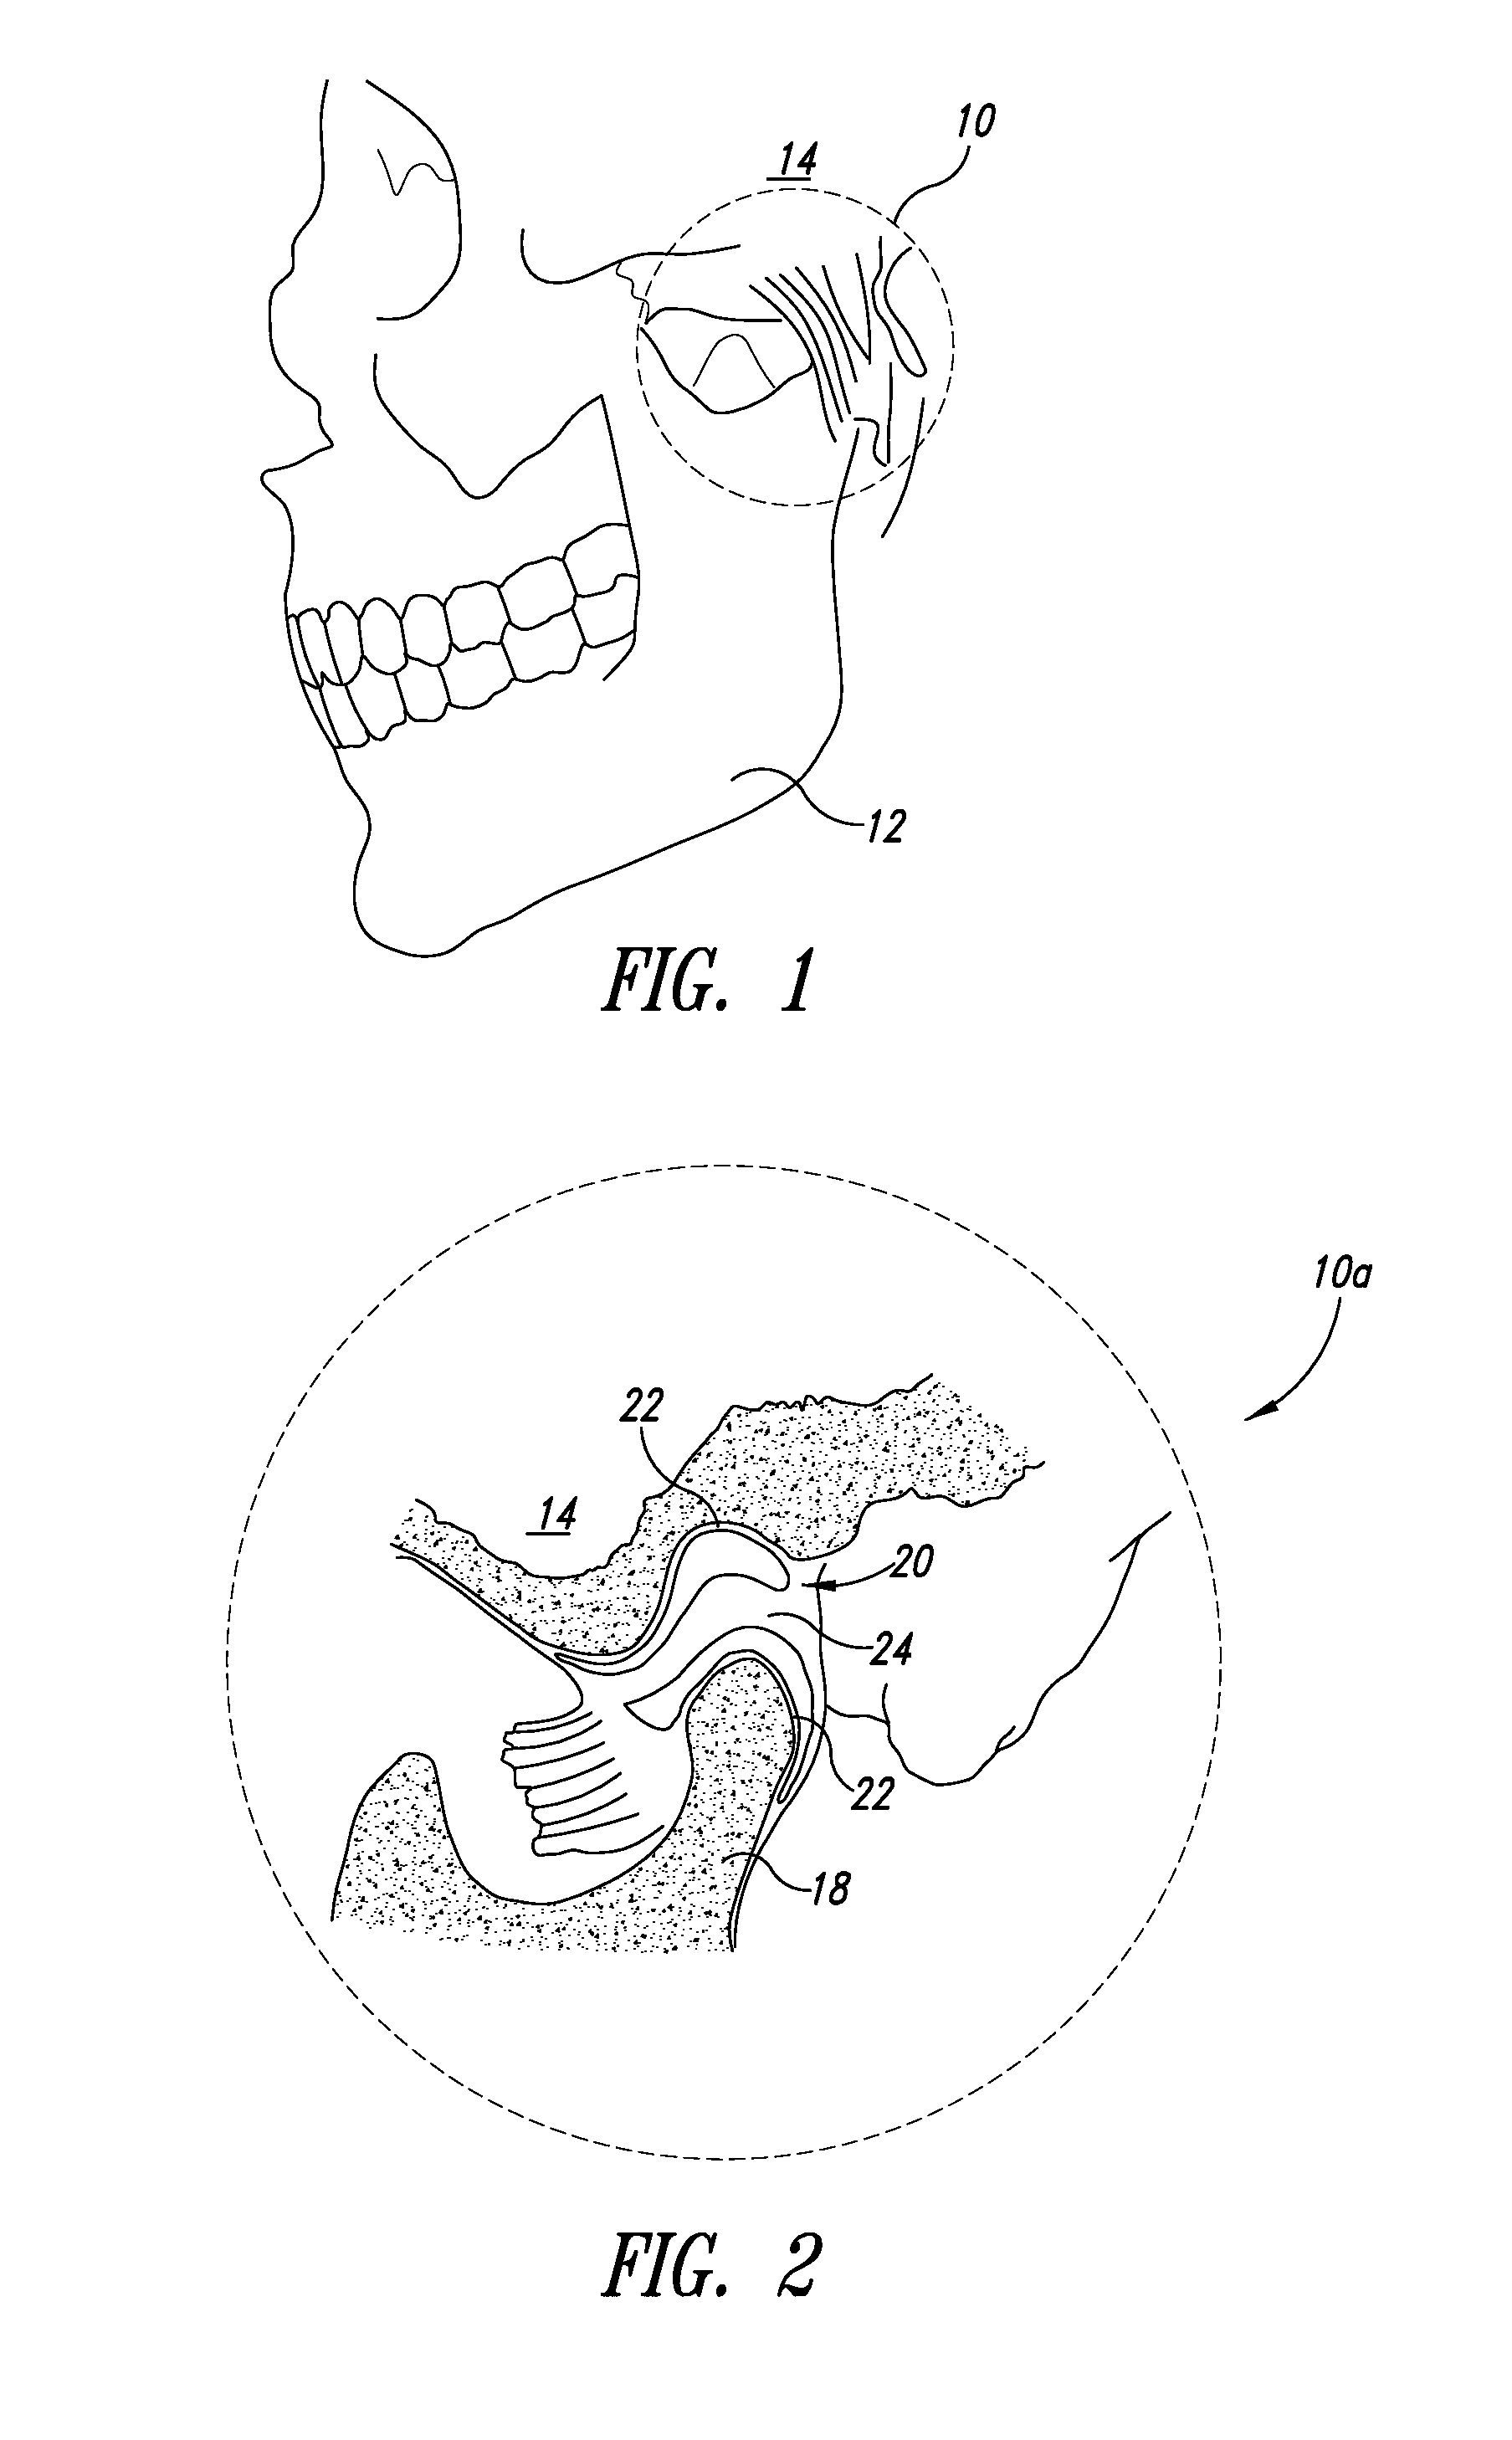 Systems, apparatuses, and methods for providing non-transcranial electrotherapy